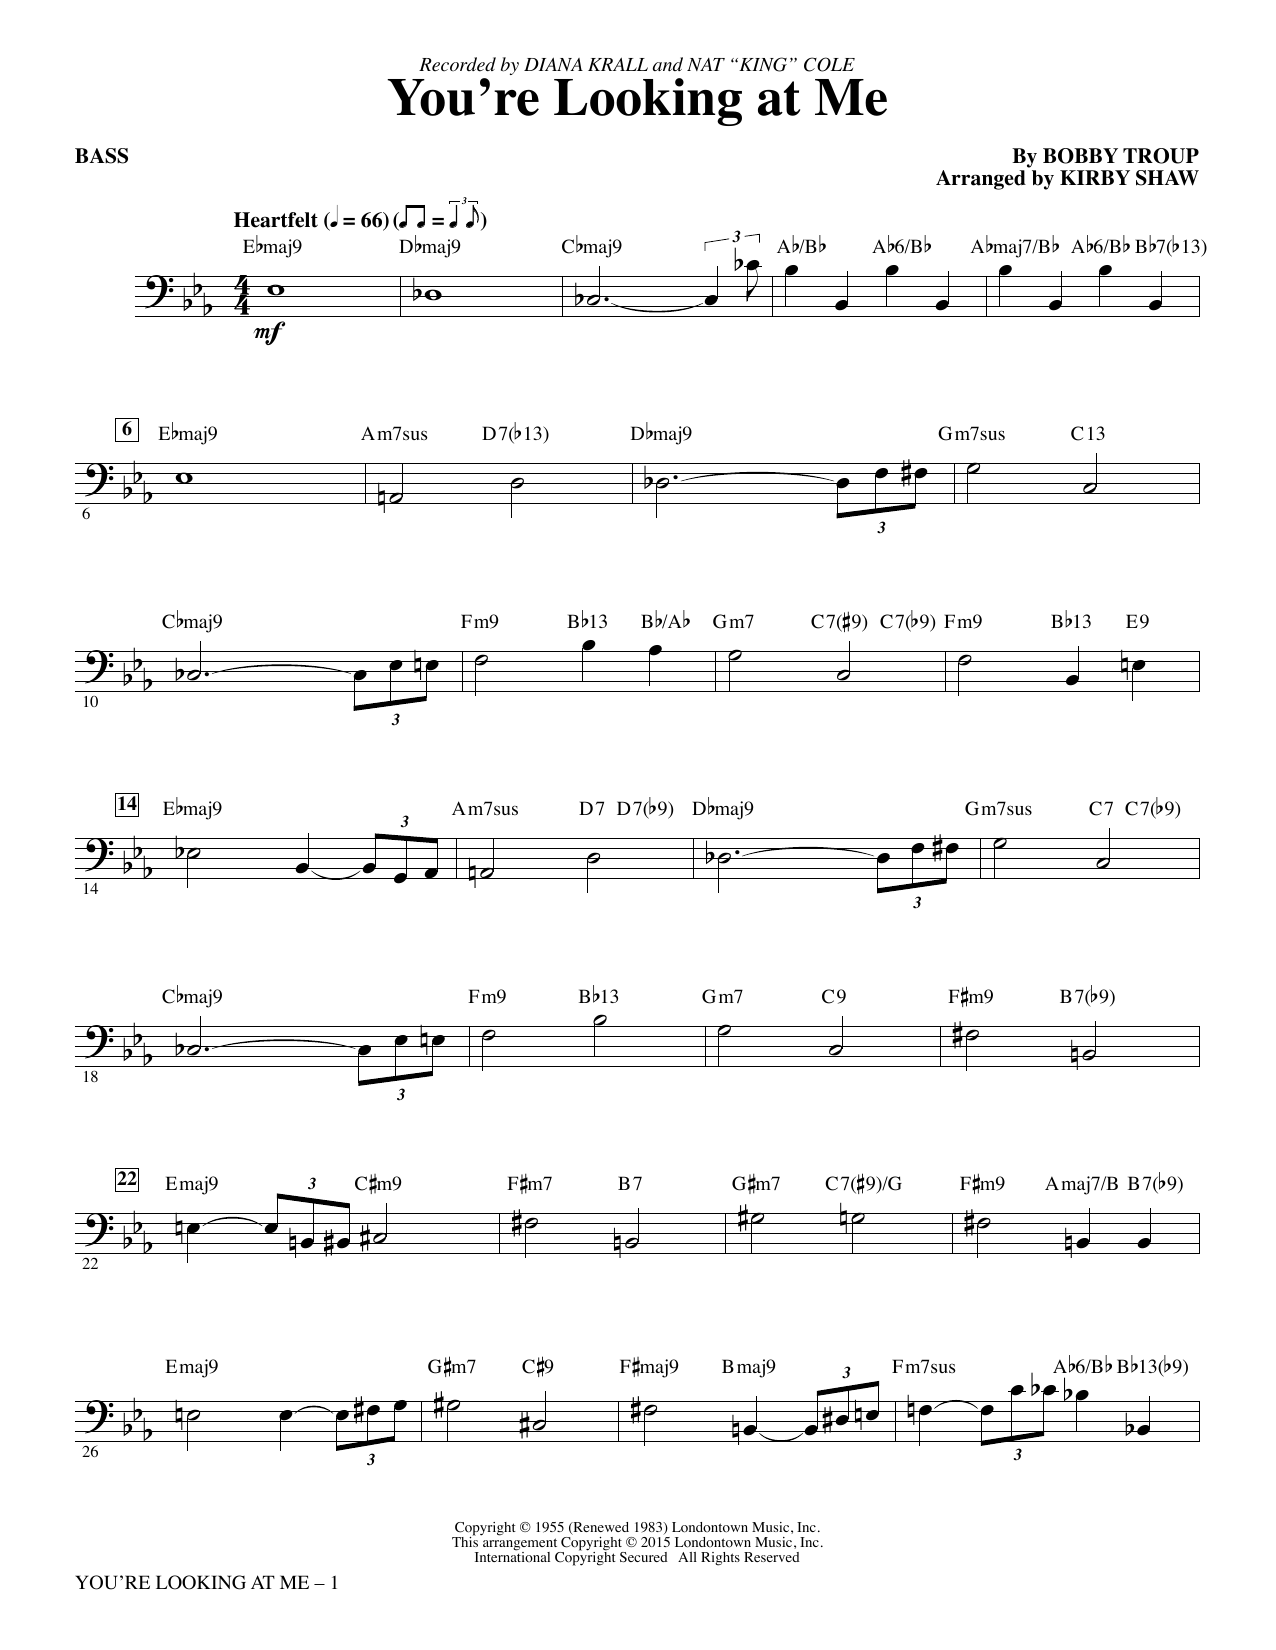 Kirby Shaw You're Looking At Me - Bass sheet music notes and chords. Download Printable PDF.